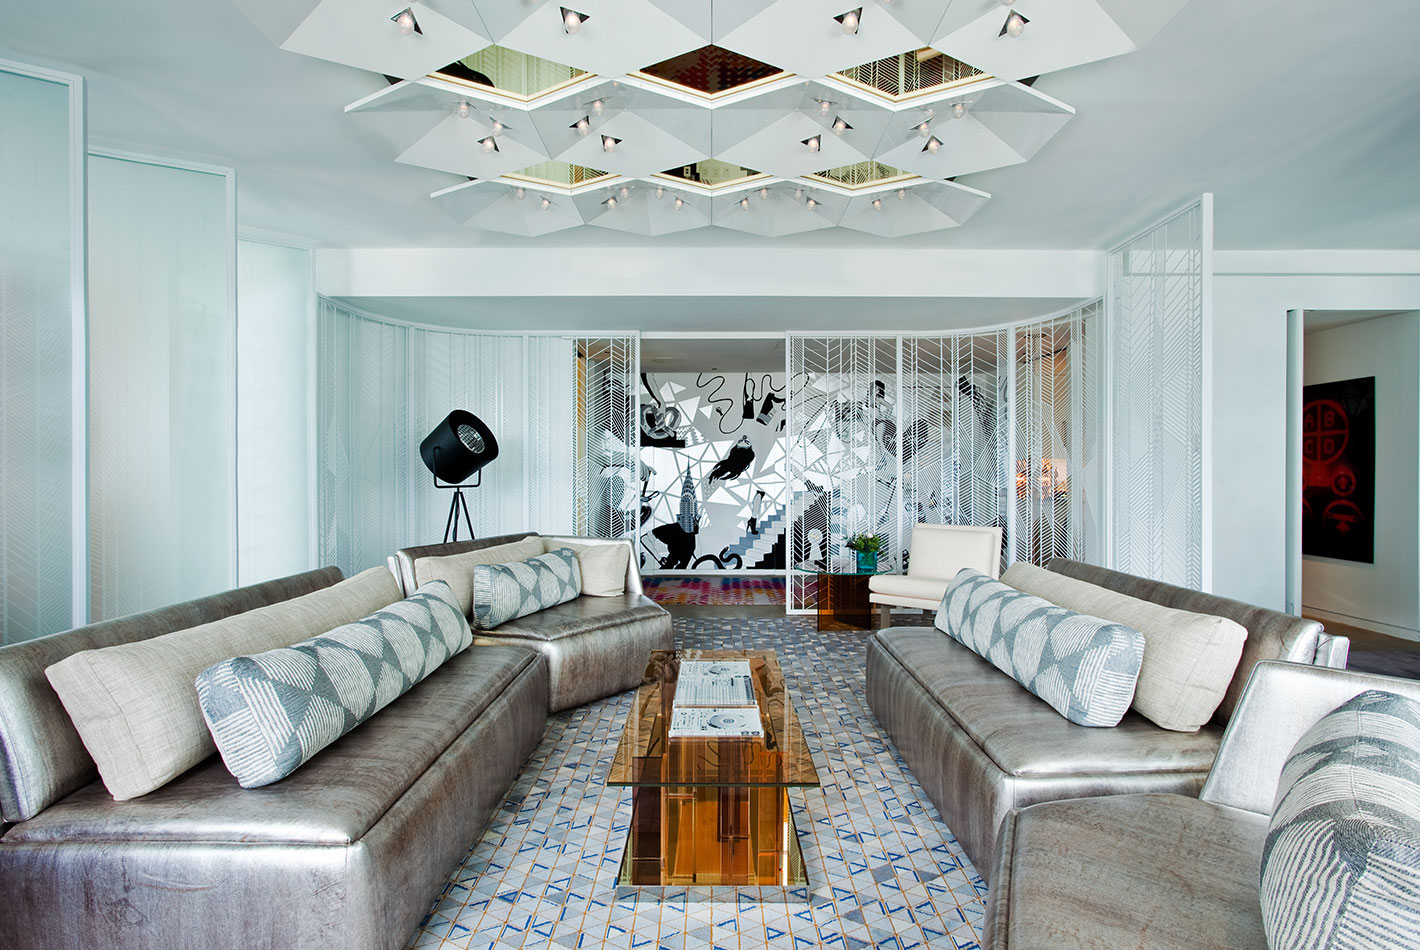 Multiple silver leather banquettes offer seating in the living room of the W Hotel Presidential Suite. A diamond patterned light fixture hangs above.